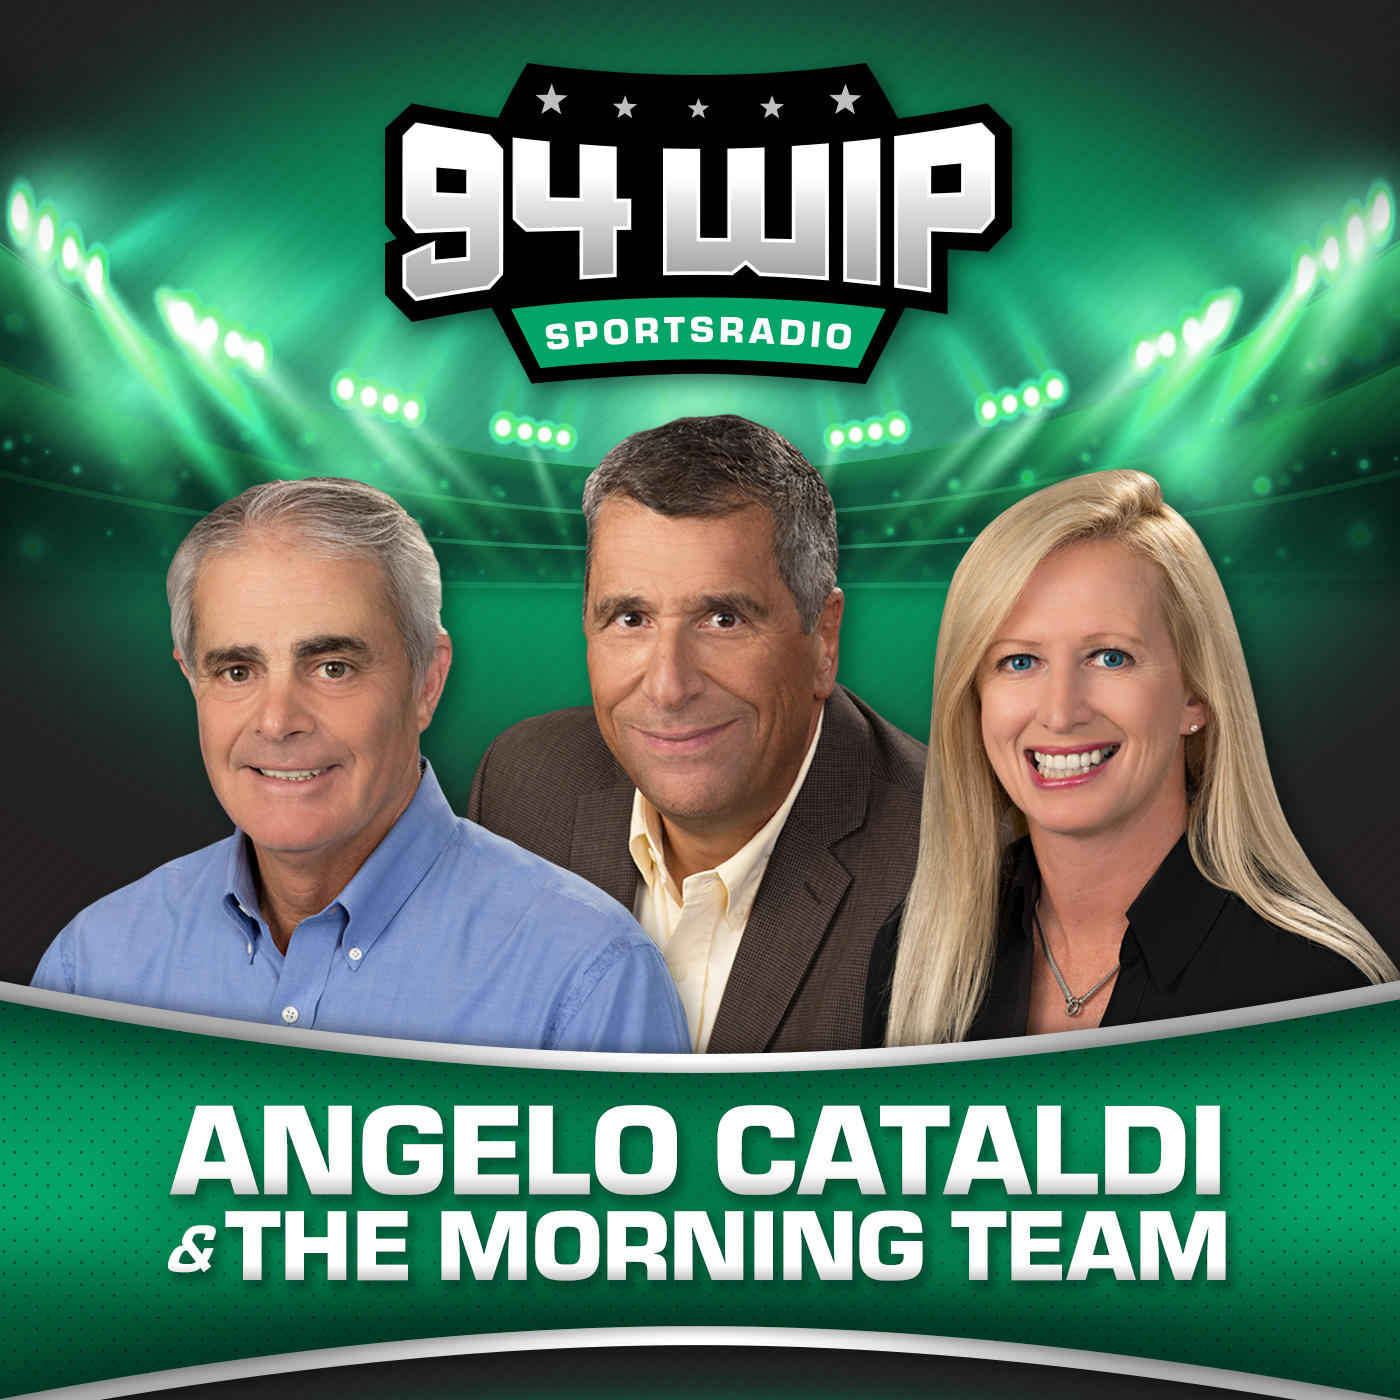 Joe Giglio Reacts To Phillies & Eagles Weekend